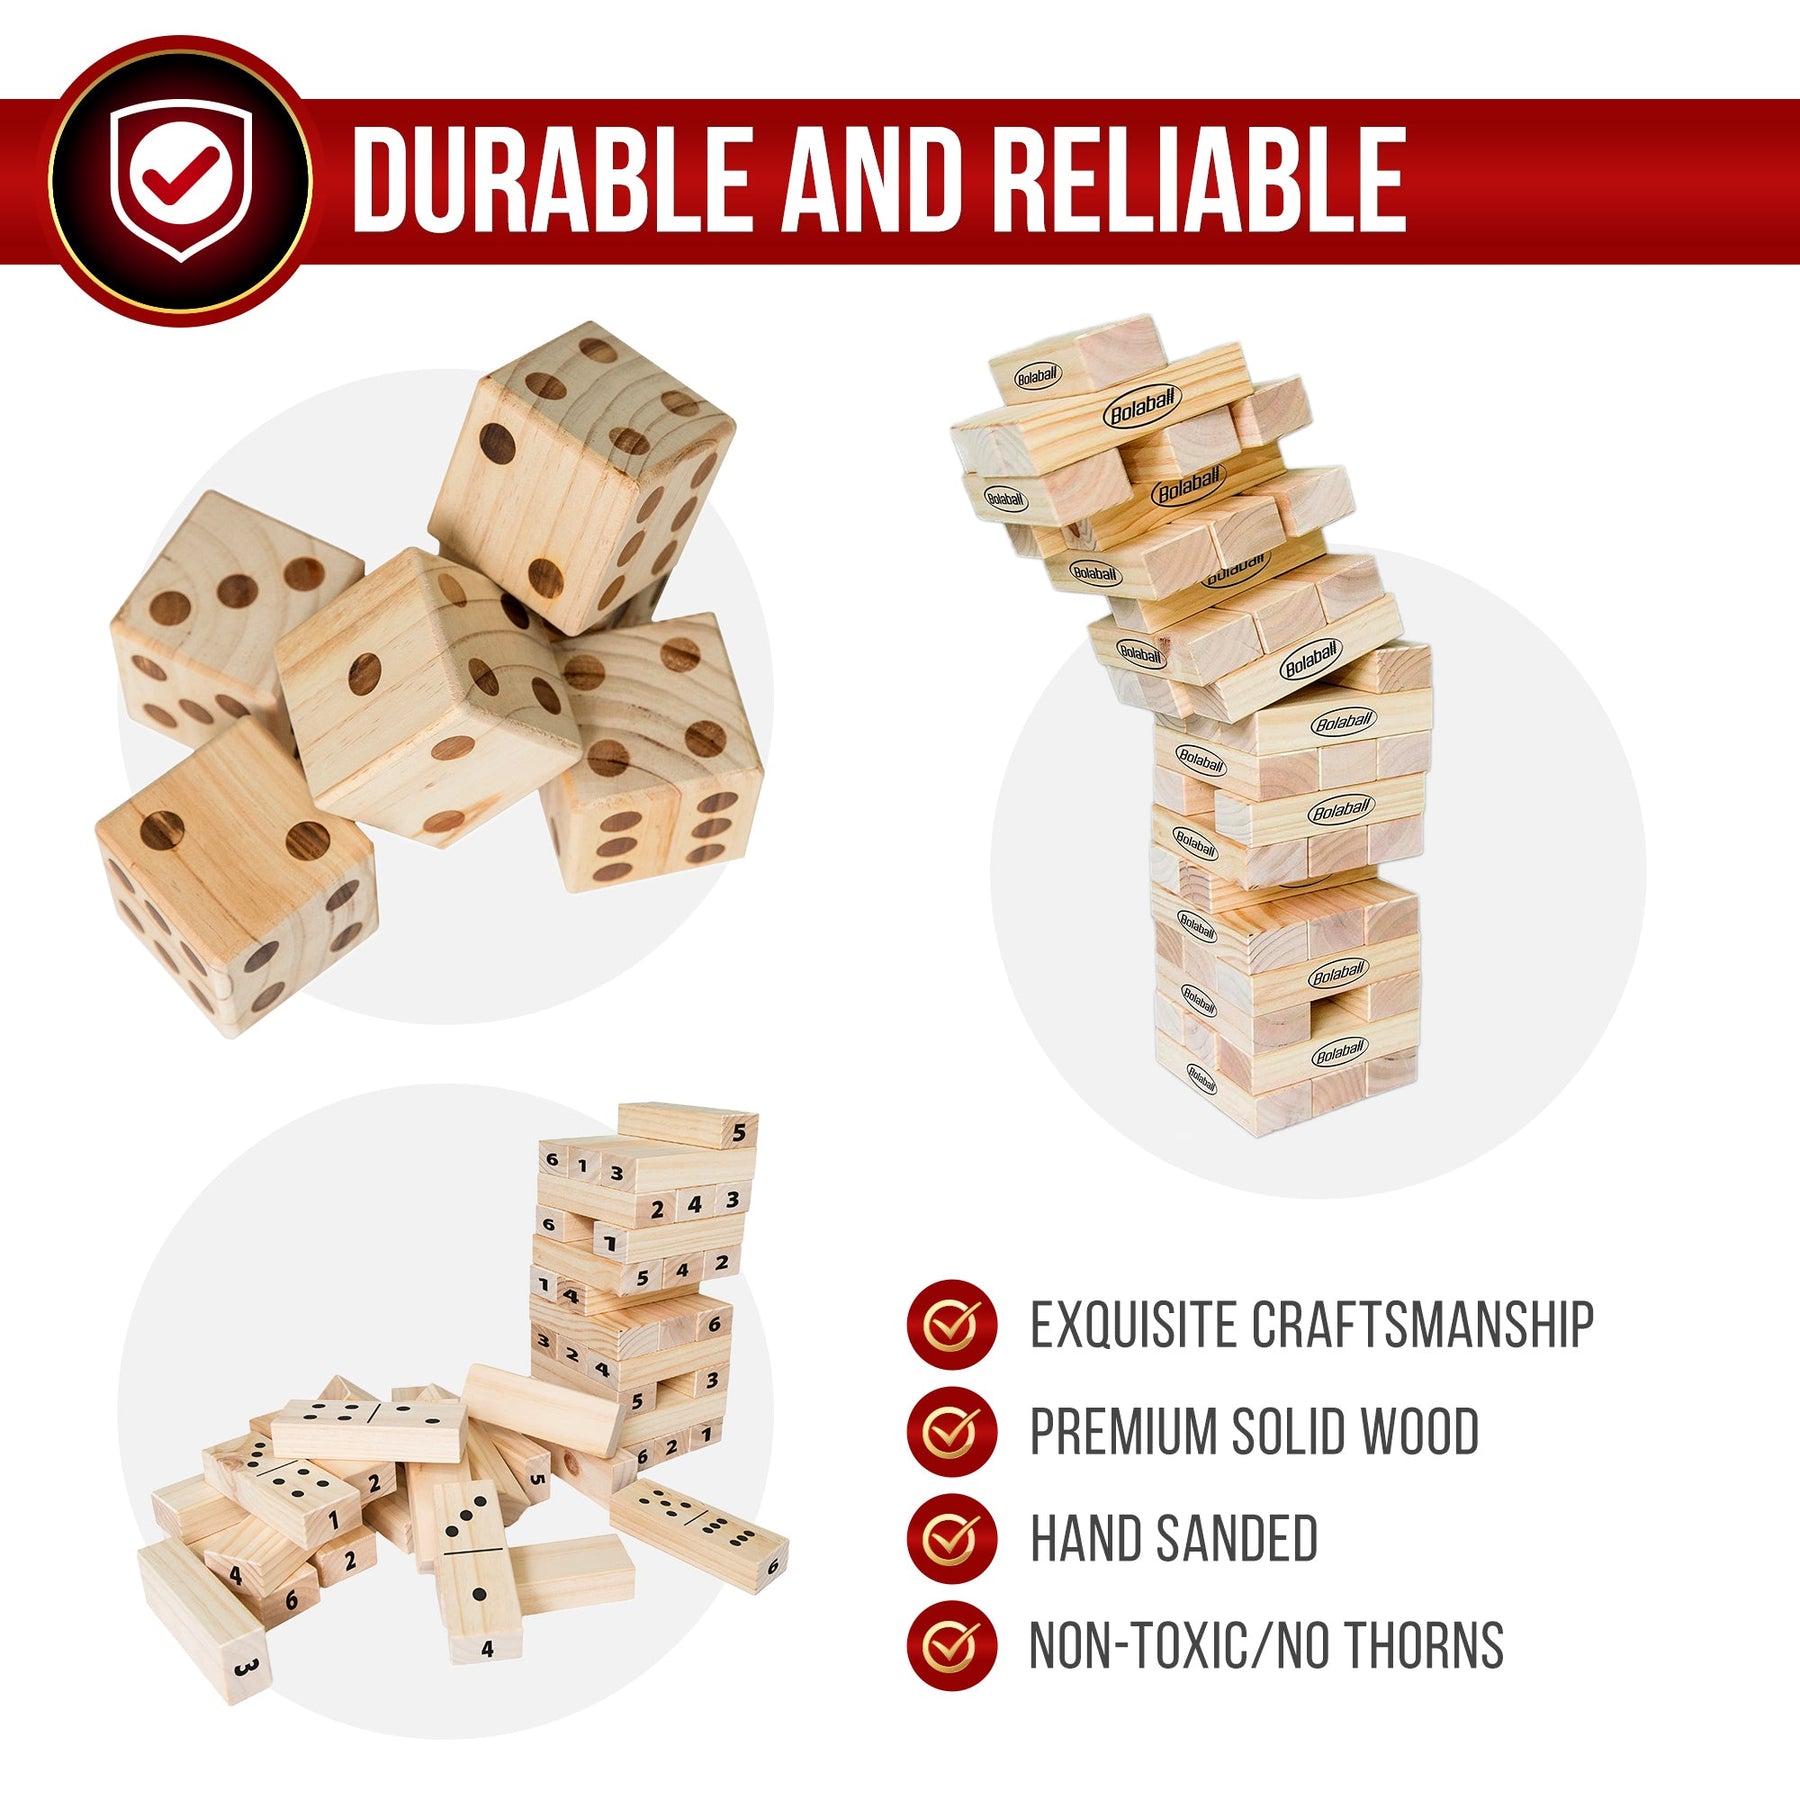 Triple Thrills Extravaganza: Giant Dice, Dominoes, and Tumbling Blocks Galore